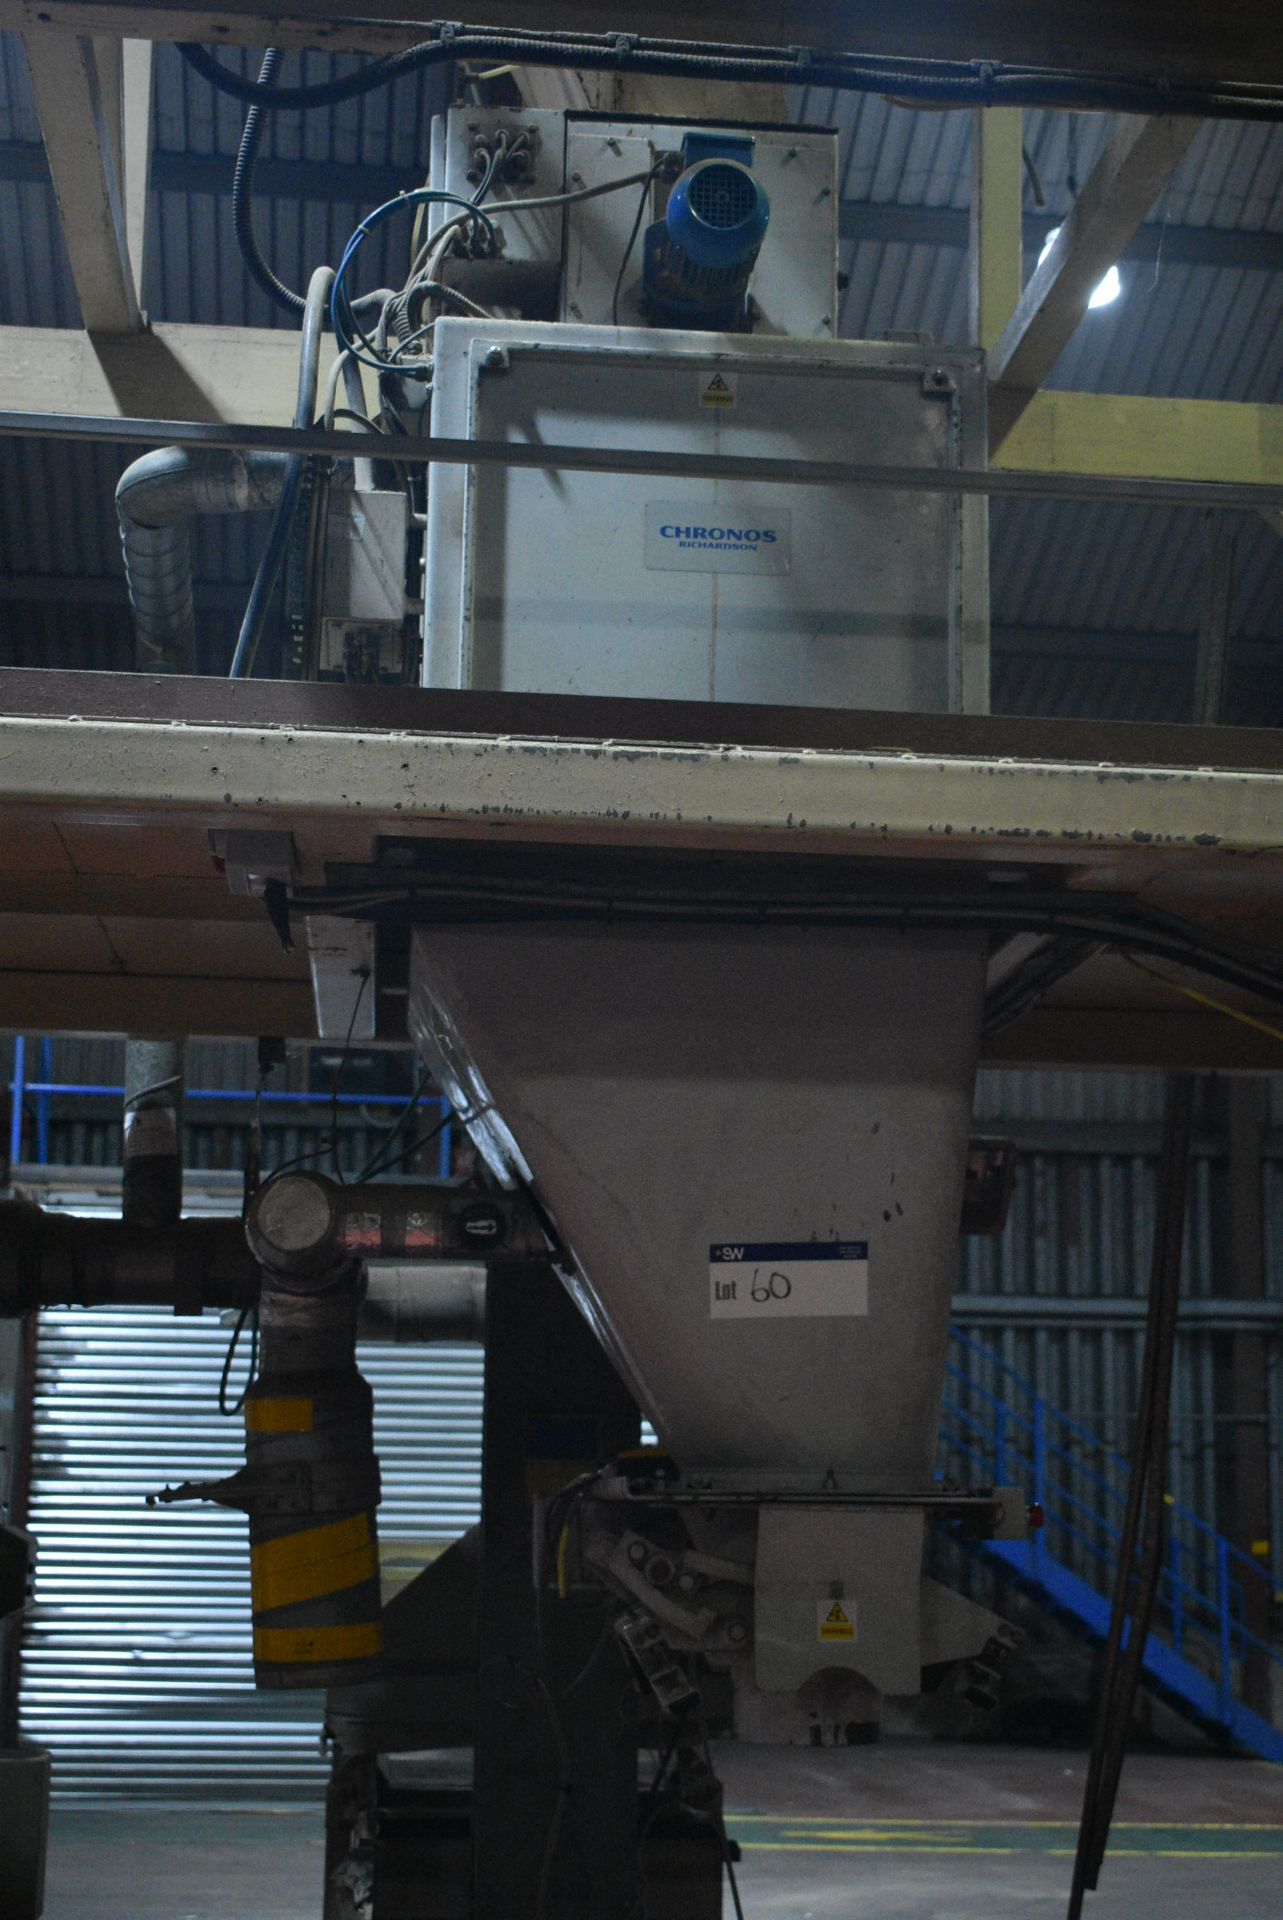 Chronos Richardson SpeedAc 8 E55A-80 LOAD CELL PACKING WEIGHER, serial no. C0660120-01-03, with